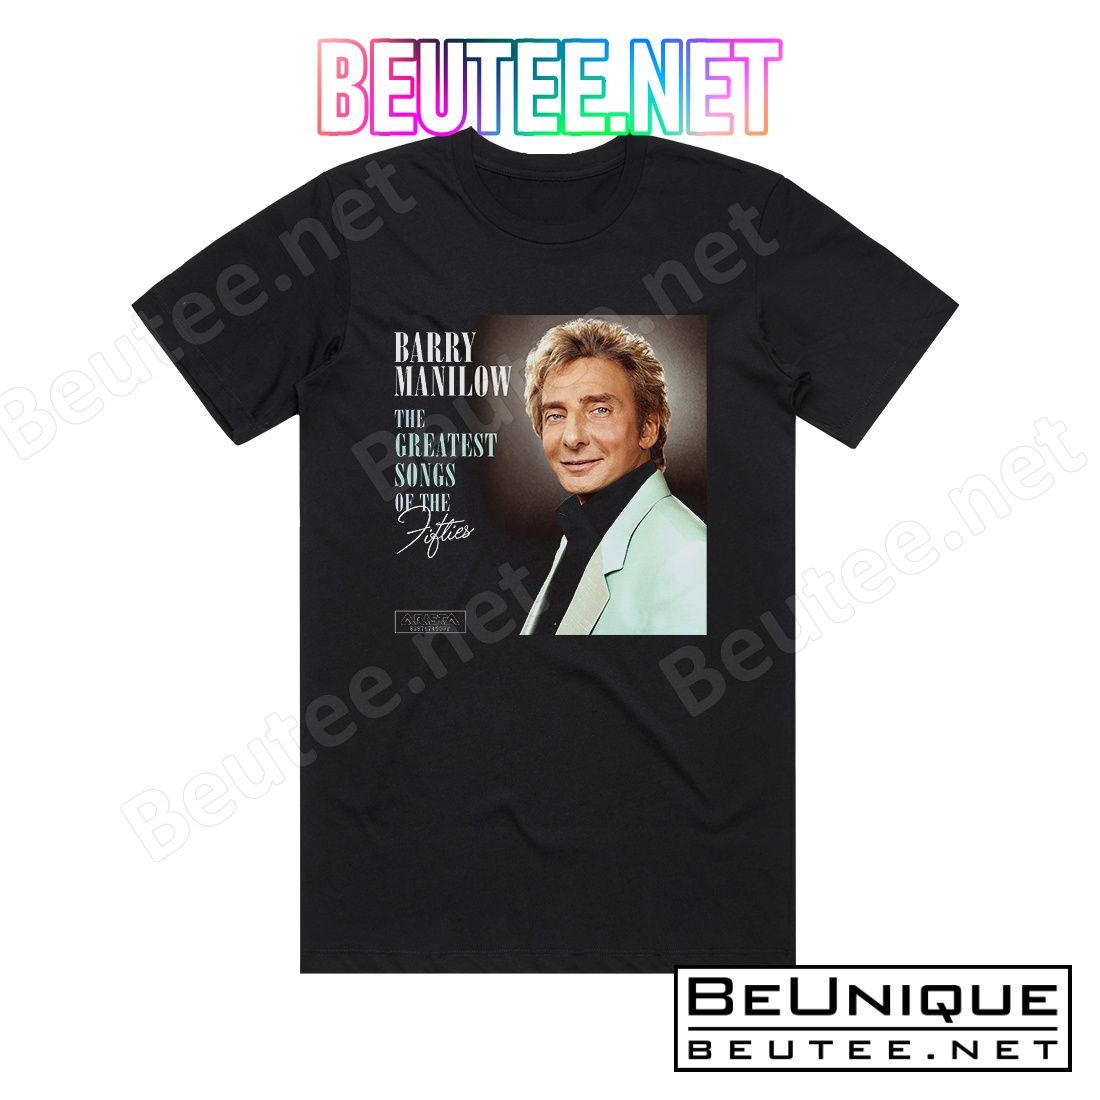 Barry Manilow The Greatest Songs Of The Fifties Album Cover T-Shirt